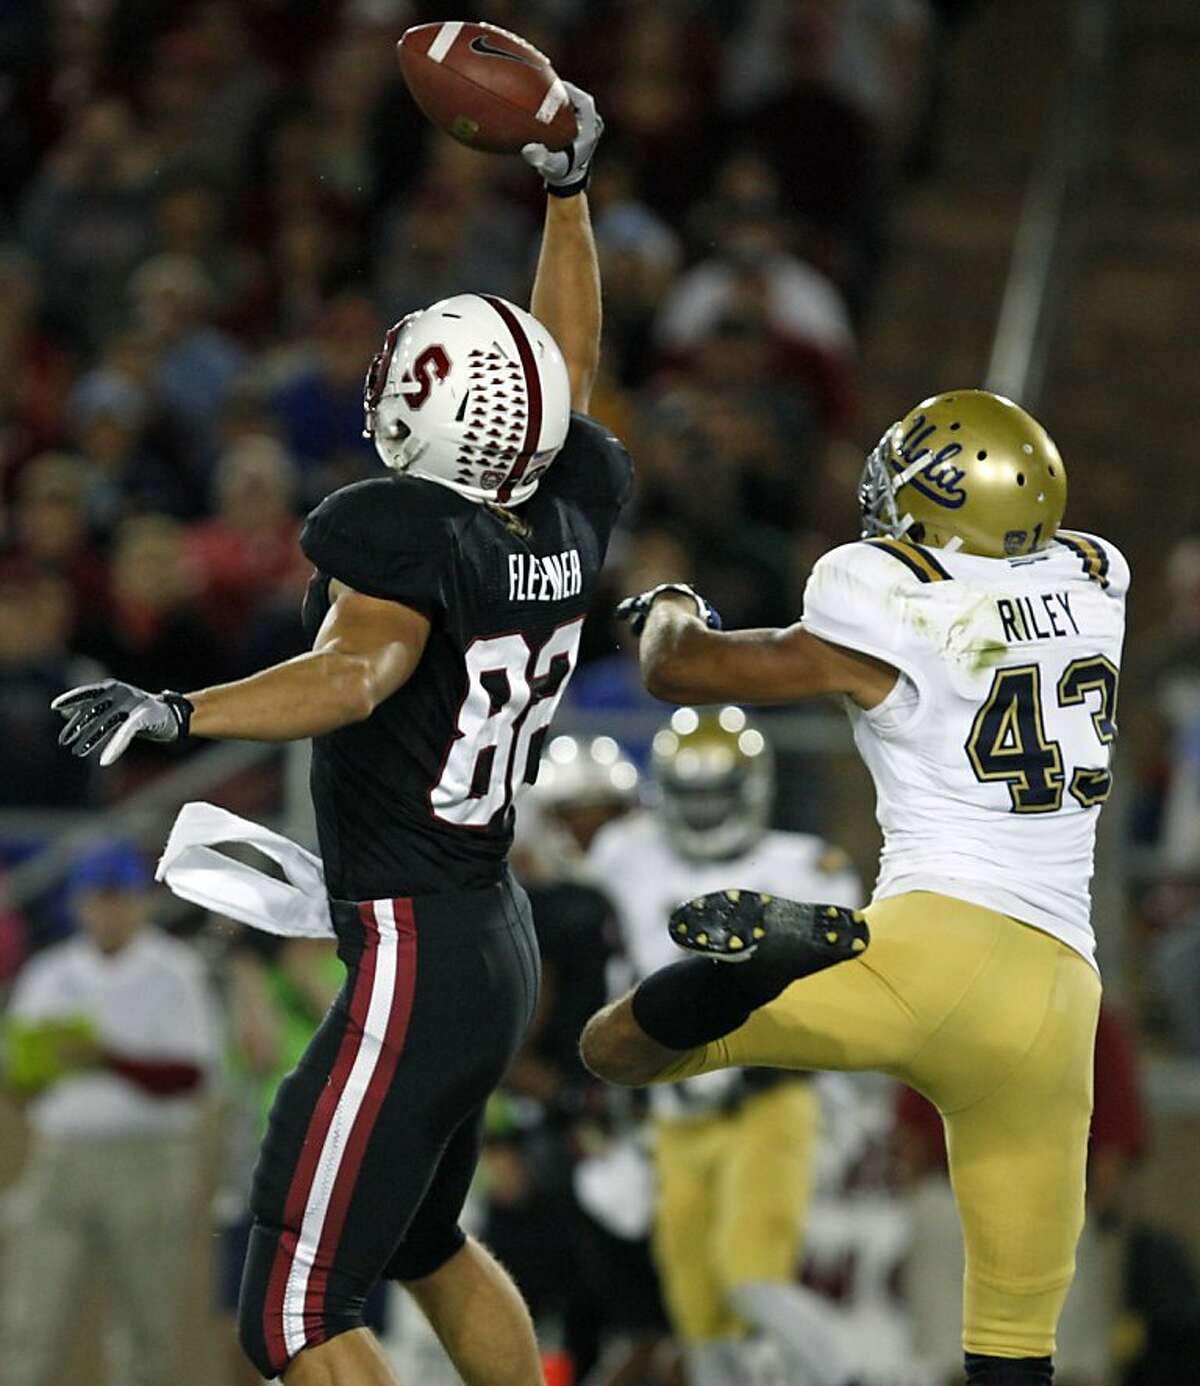 Stanford's tight end Coby Fleener (82) makes a one handed touchdown catch from quarterback Andrew Luck #12 against the UCLA BruinÍs at Stanford Stadium on October 1, 2011 in Stanford California. The Cardinal lead the BruinÍs 17-7 at the half.